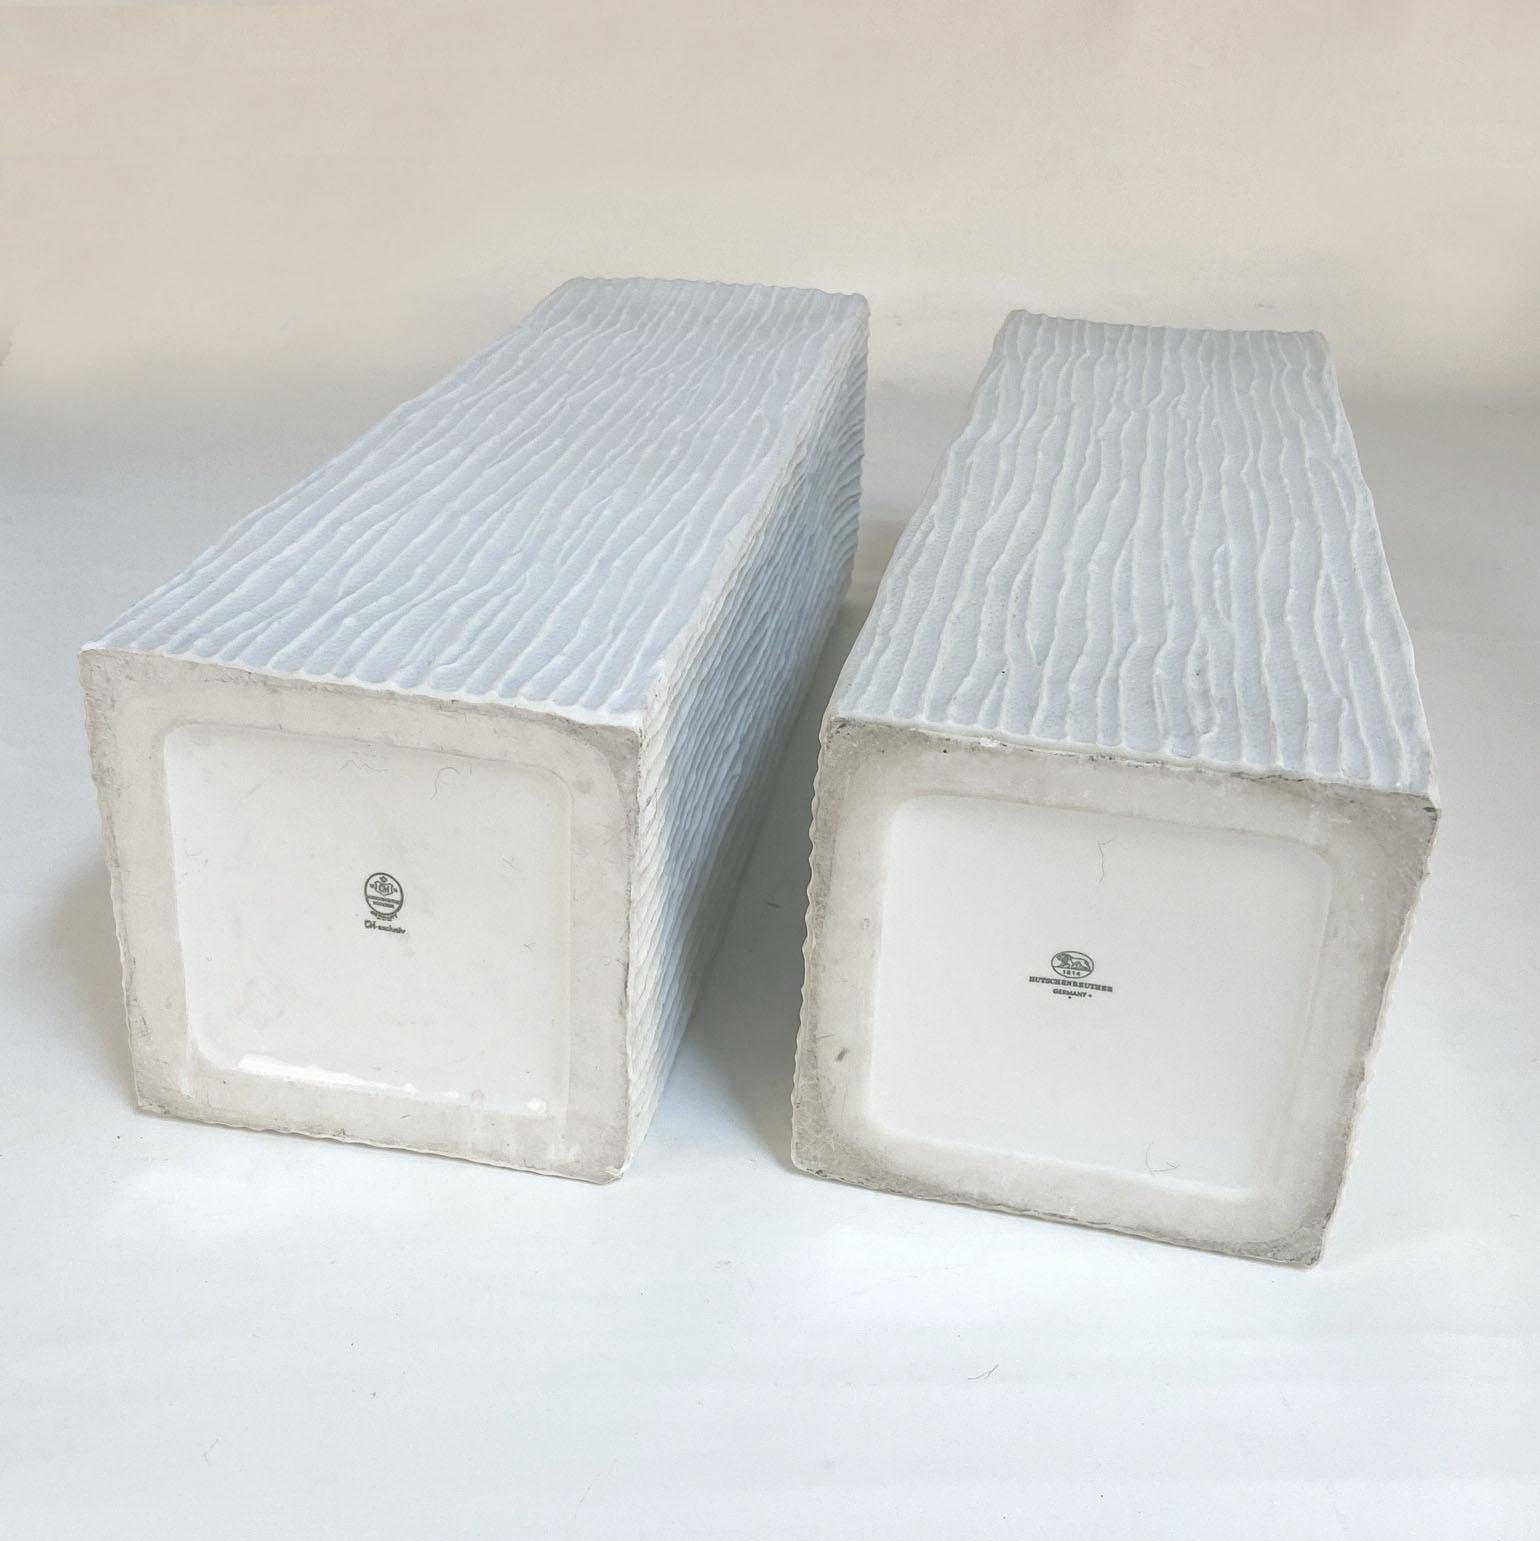 Pair of Large White Square Relief Vases by Hutschenreuther For Sale 1